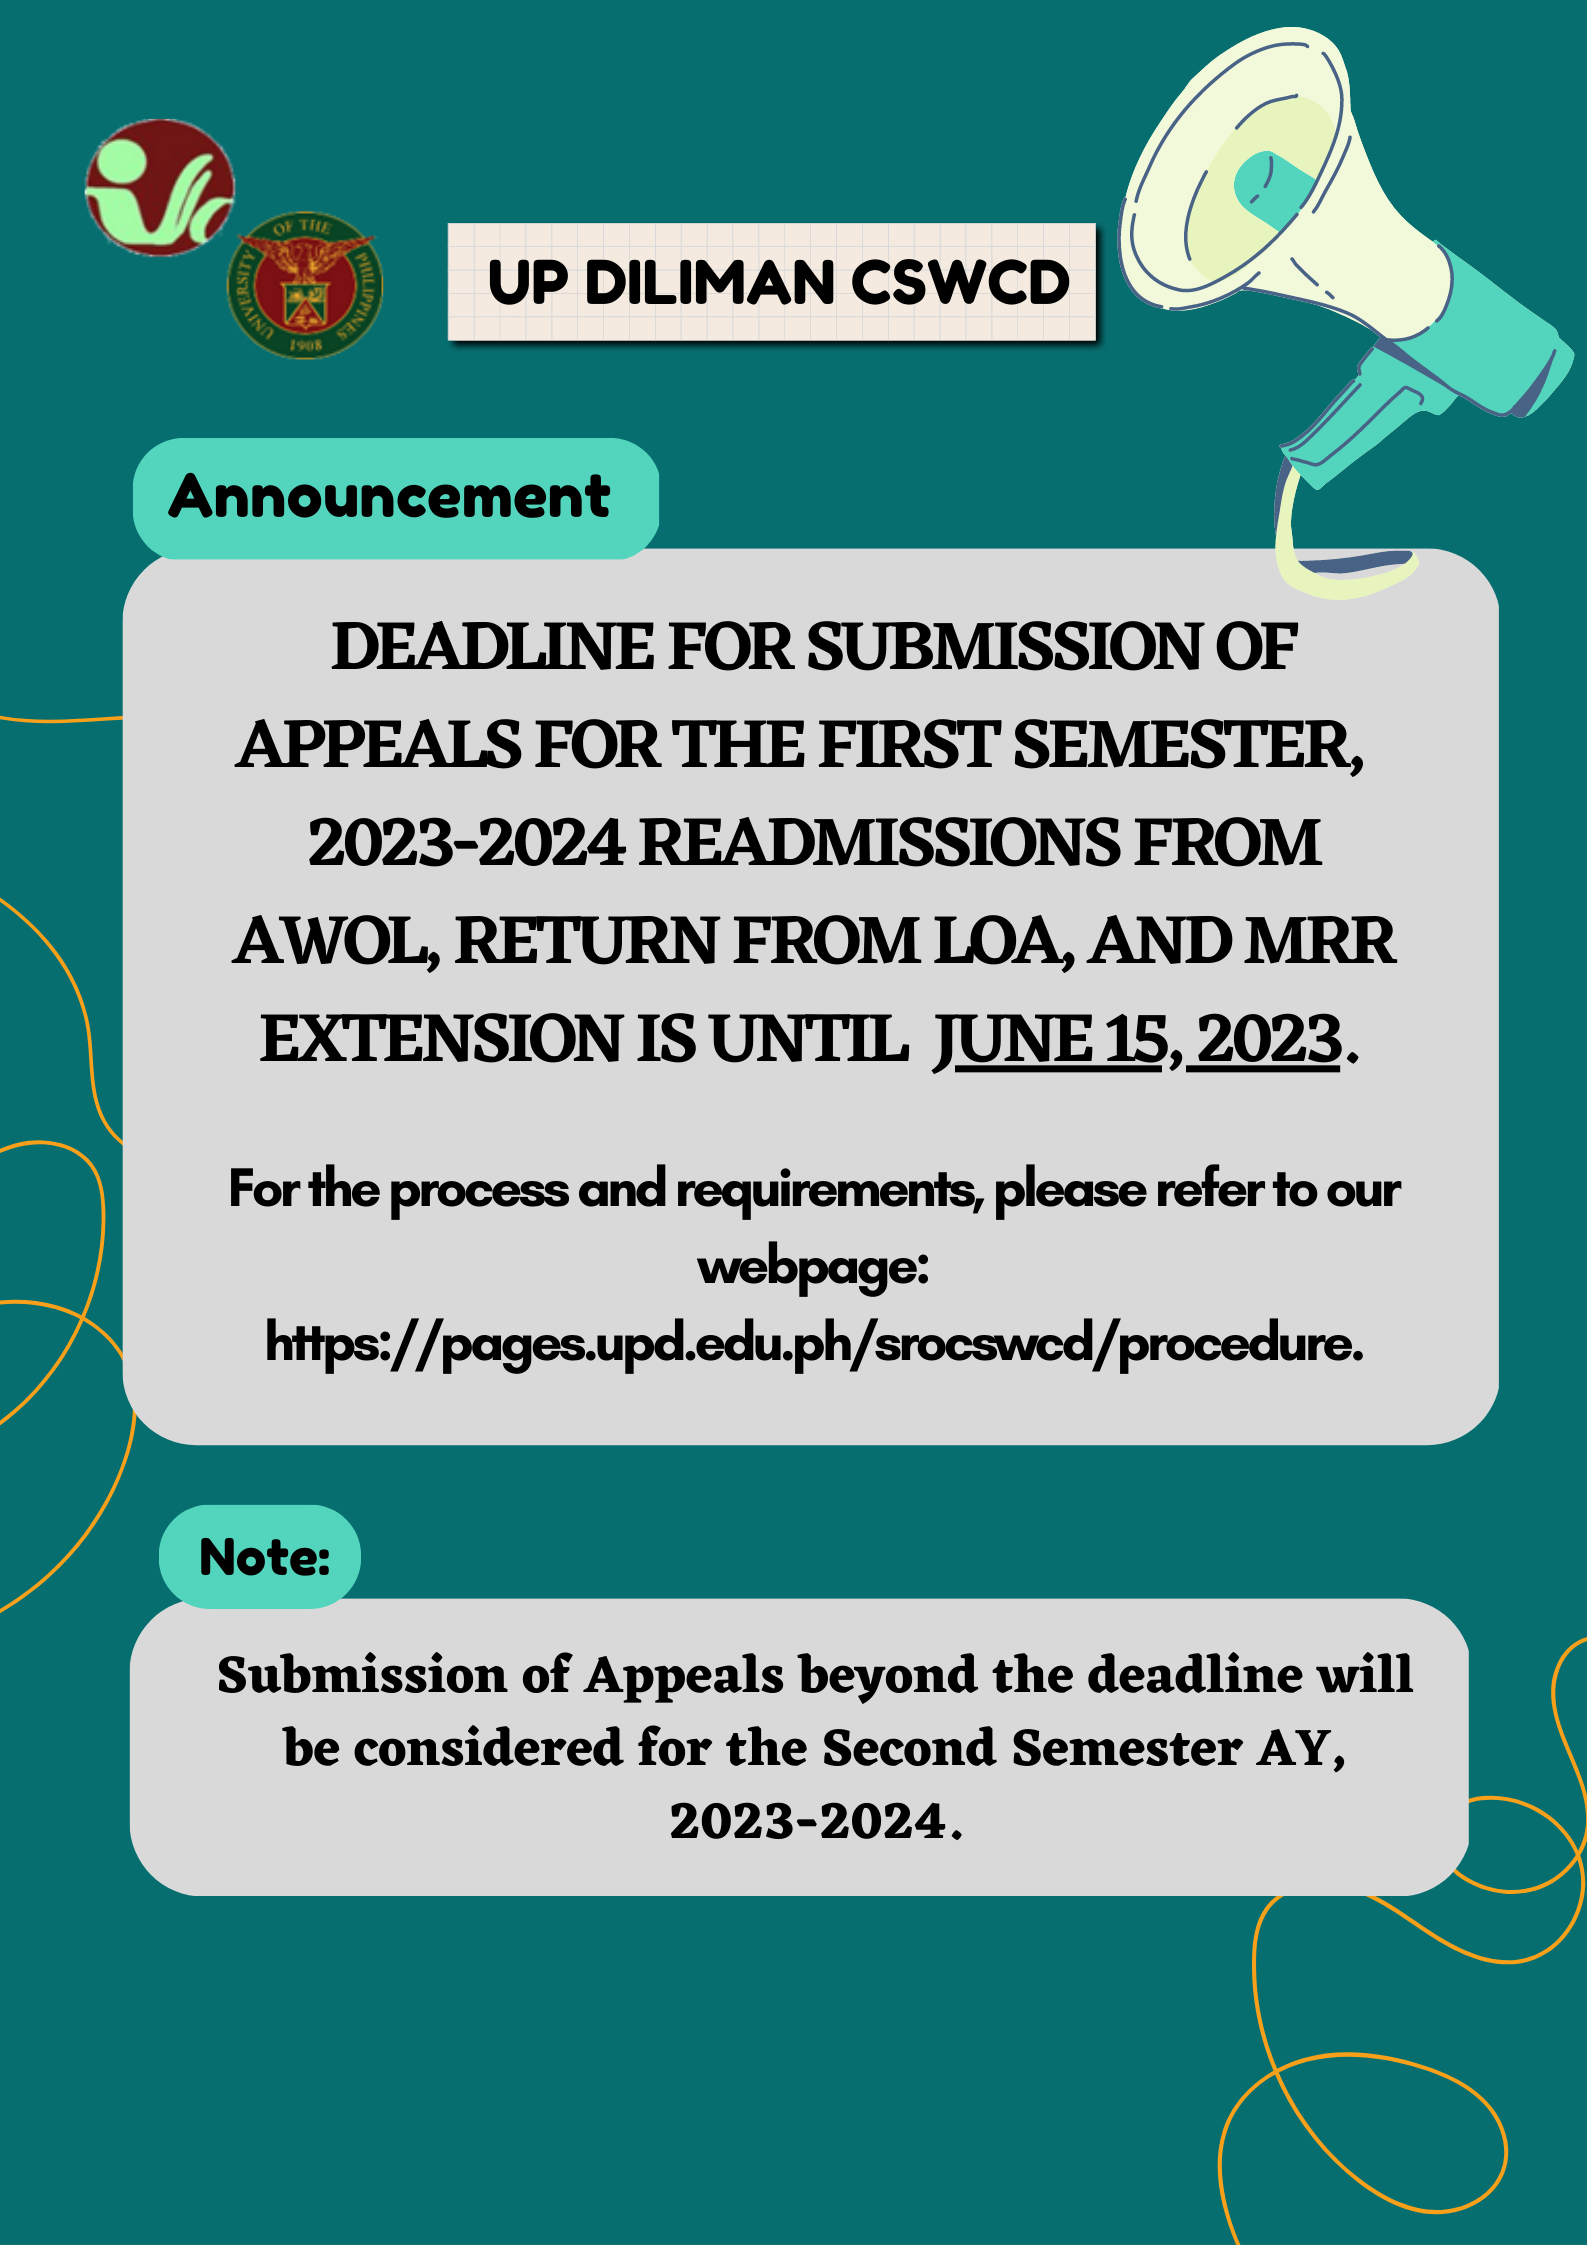 Deadline for Submission of Appeals for the First Semester AY 2023-2024 Readmissions from Absence Without Leave (AWOL), Return from LOA, and MRR Extension